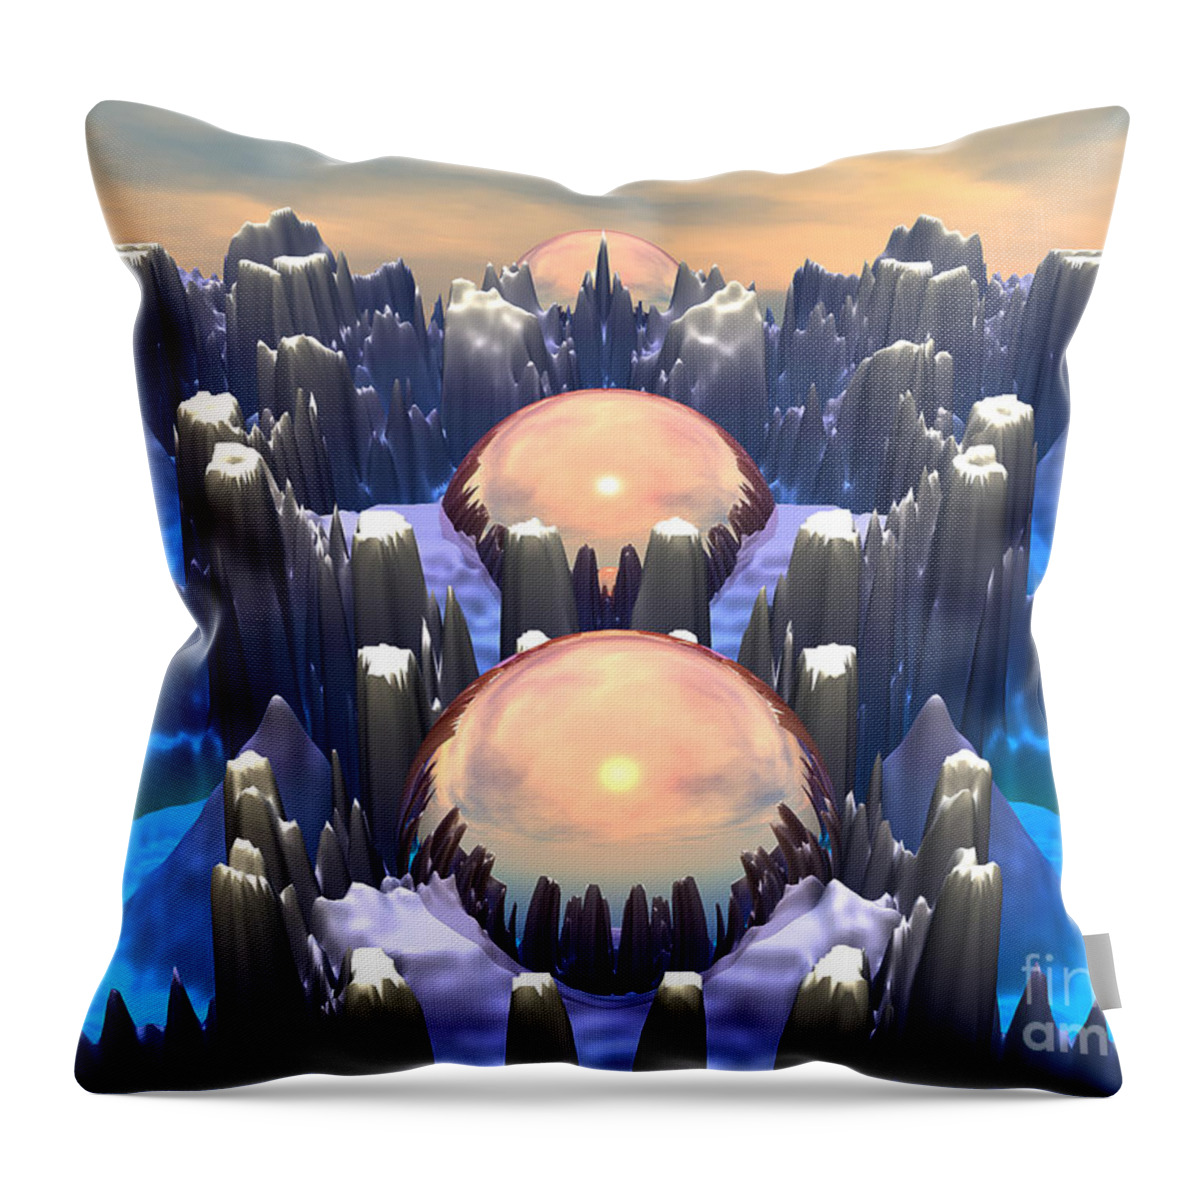 Fractal Throw Pillow featuring the digital art Reflection of Three Spheres by Phil Perkins